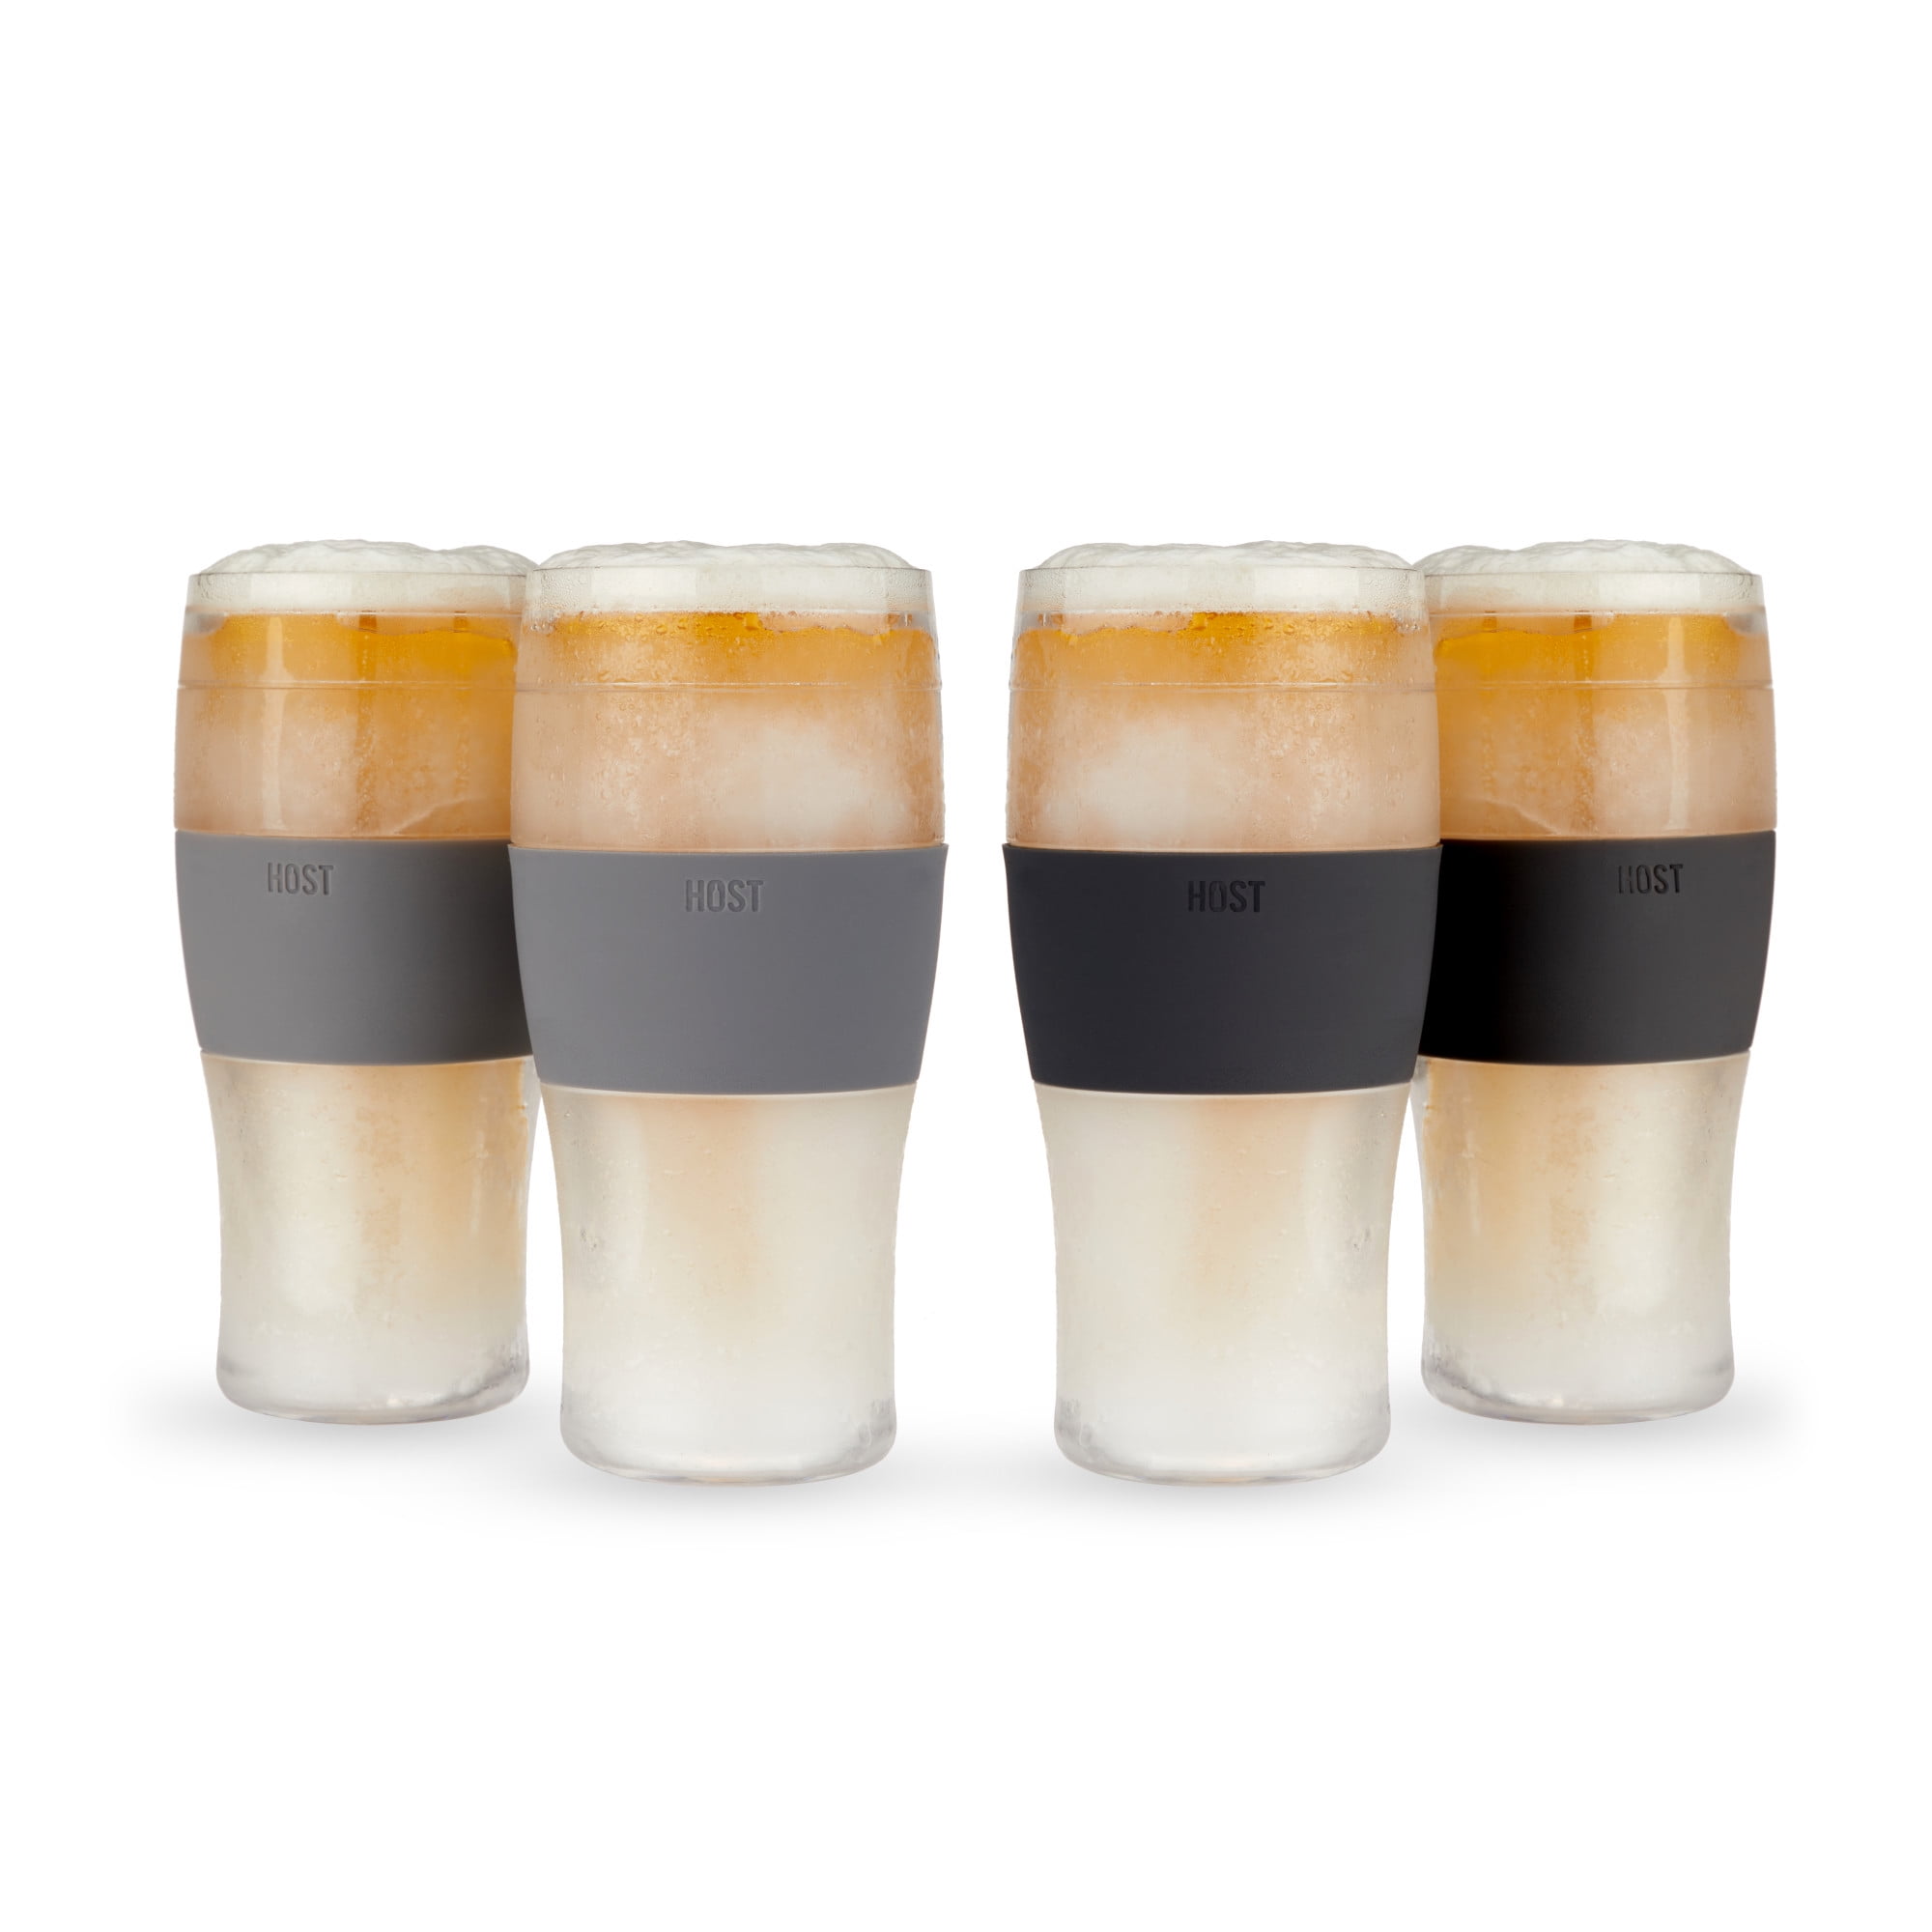 HOST Beer Glass Cooling Cups — The Basketry